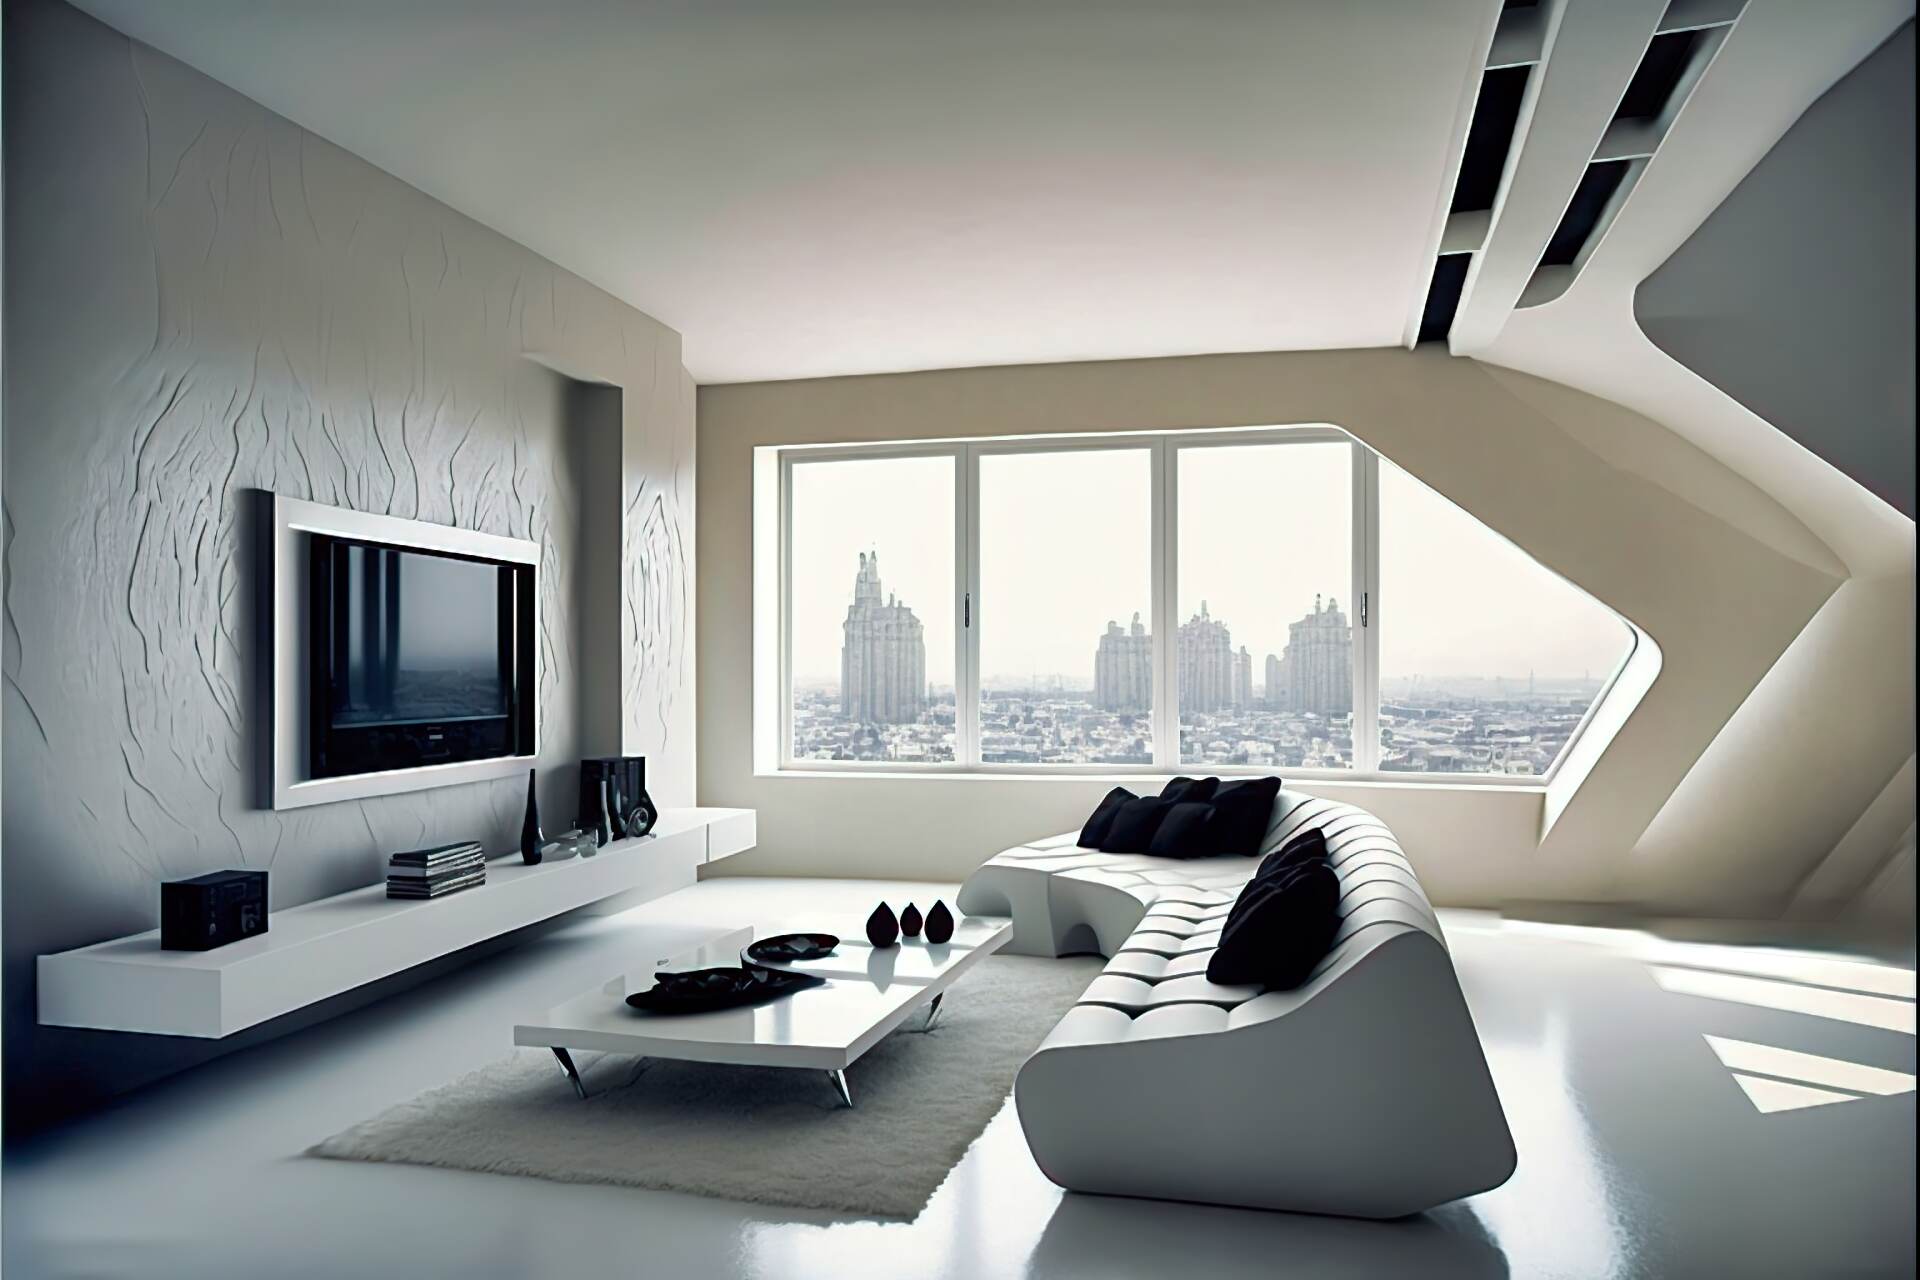 A Futuristic Living Room With A Minimalist Aesthetic. The Walls Are Painted A Soft Grey, With A Large, Flat-Screen Tv Mounted On One Wall. A White, Modular Sofa Is Made Up Of Chaise Lounges And Armchairs. A Sleek, Black Coffee Table And White Accent Chair Complete The Look. A Wall Of Windows Floods The Room With Natural Light.